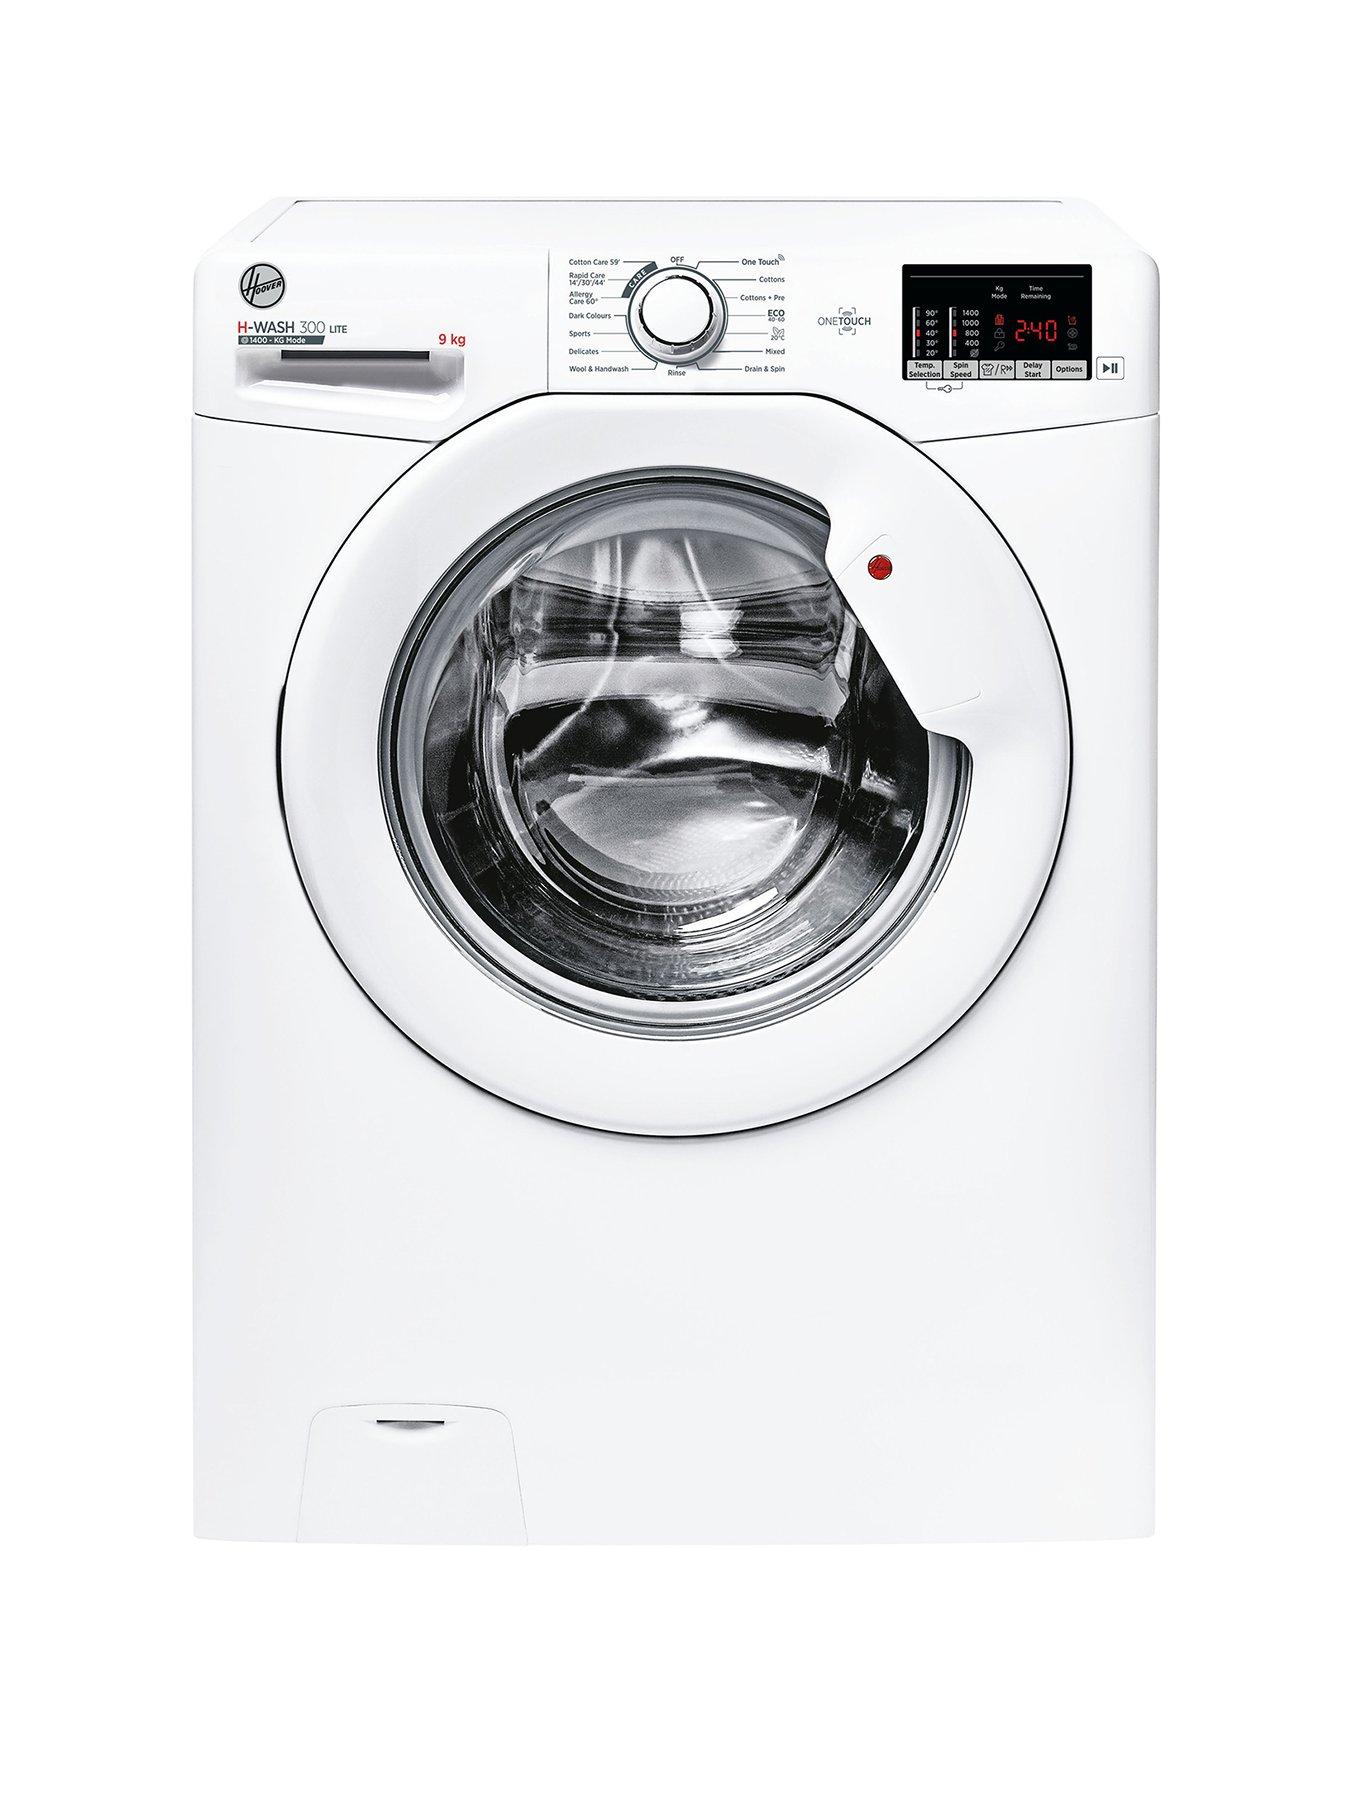 Washing Machines Latest Offers & Deals